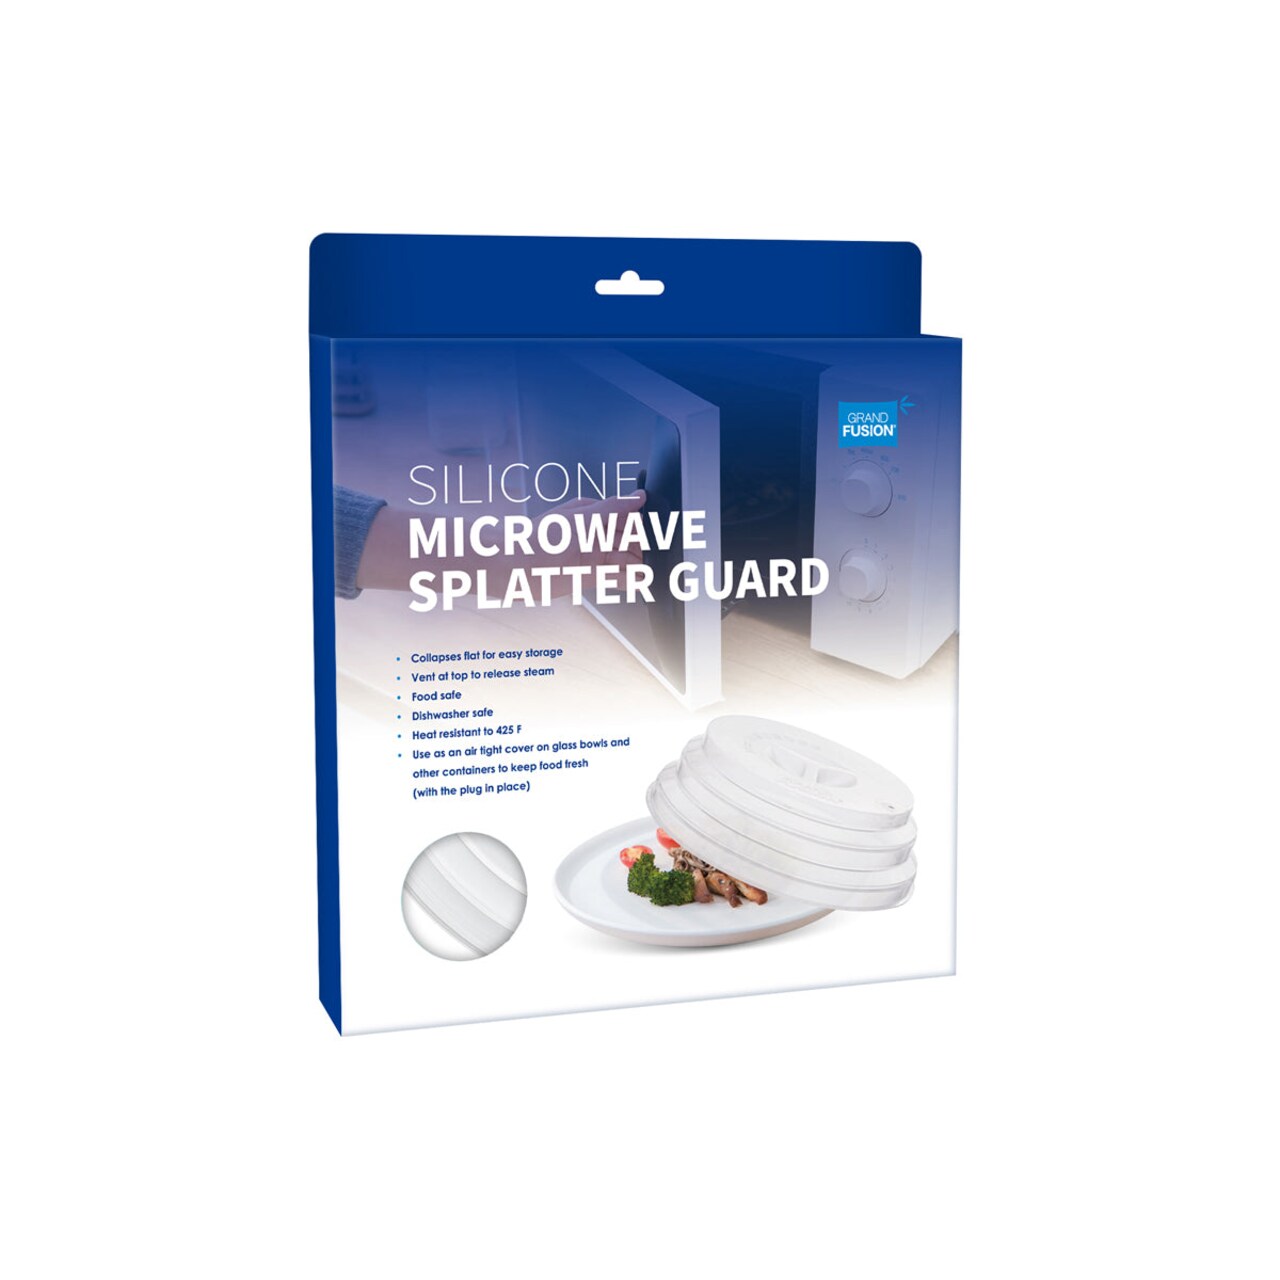 Collapsible Silicone Splatter Guard Cover, Microwave Safe - from